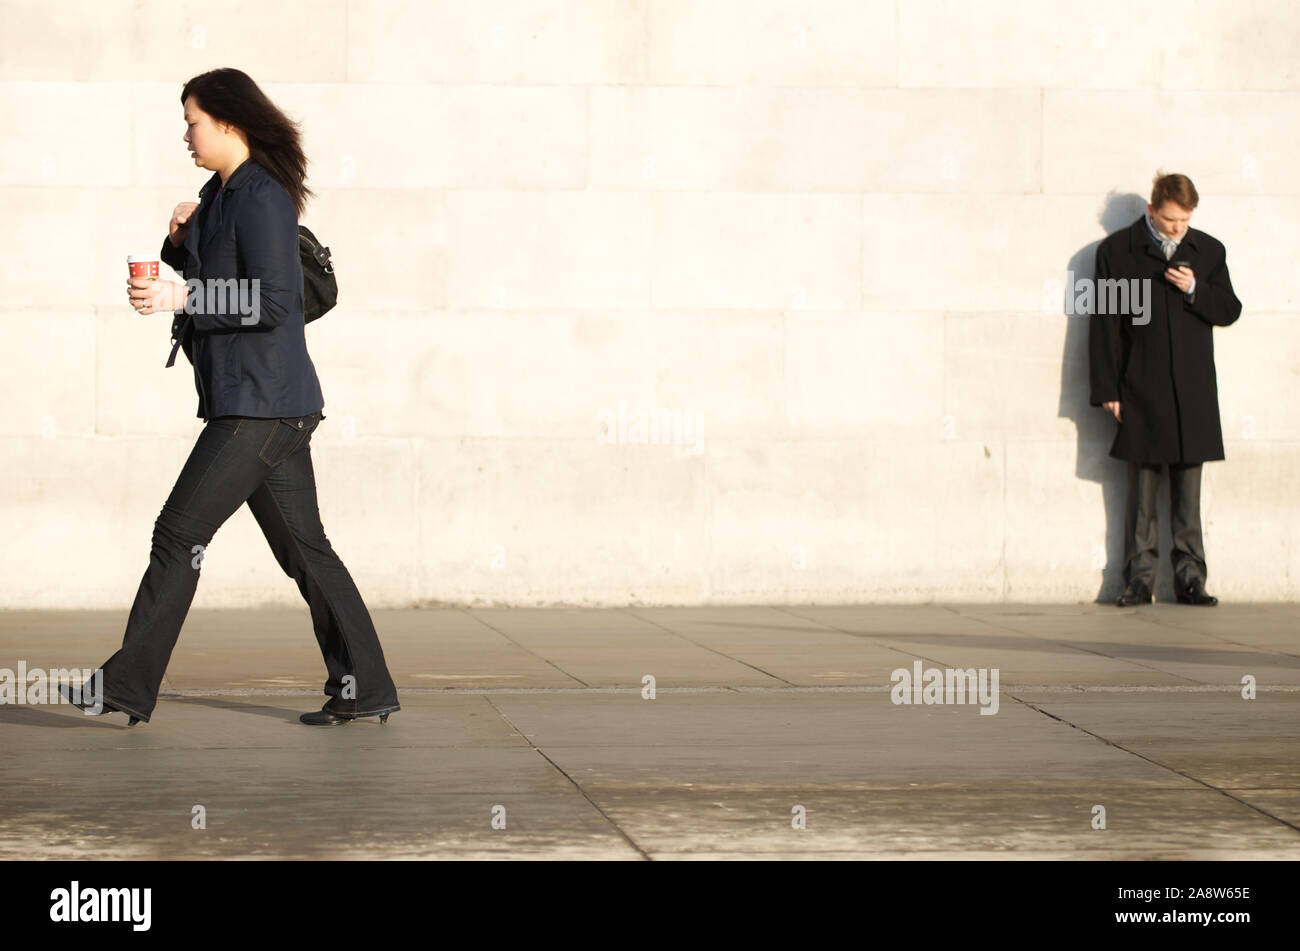 LONDON - NOVEMBER 17, 2011: A woman carrying a coffee cup passes a man standing looking at his mobile phone in Trafalgar Square. Stock Photo